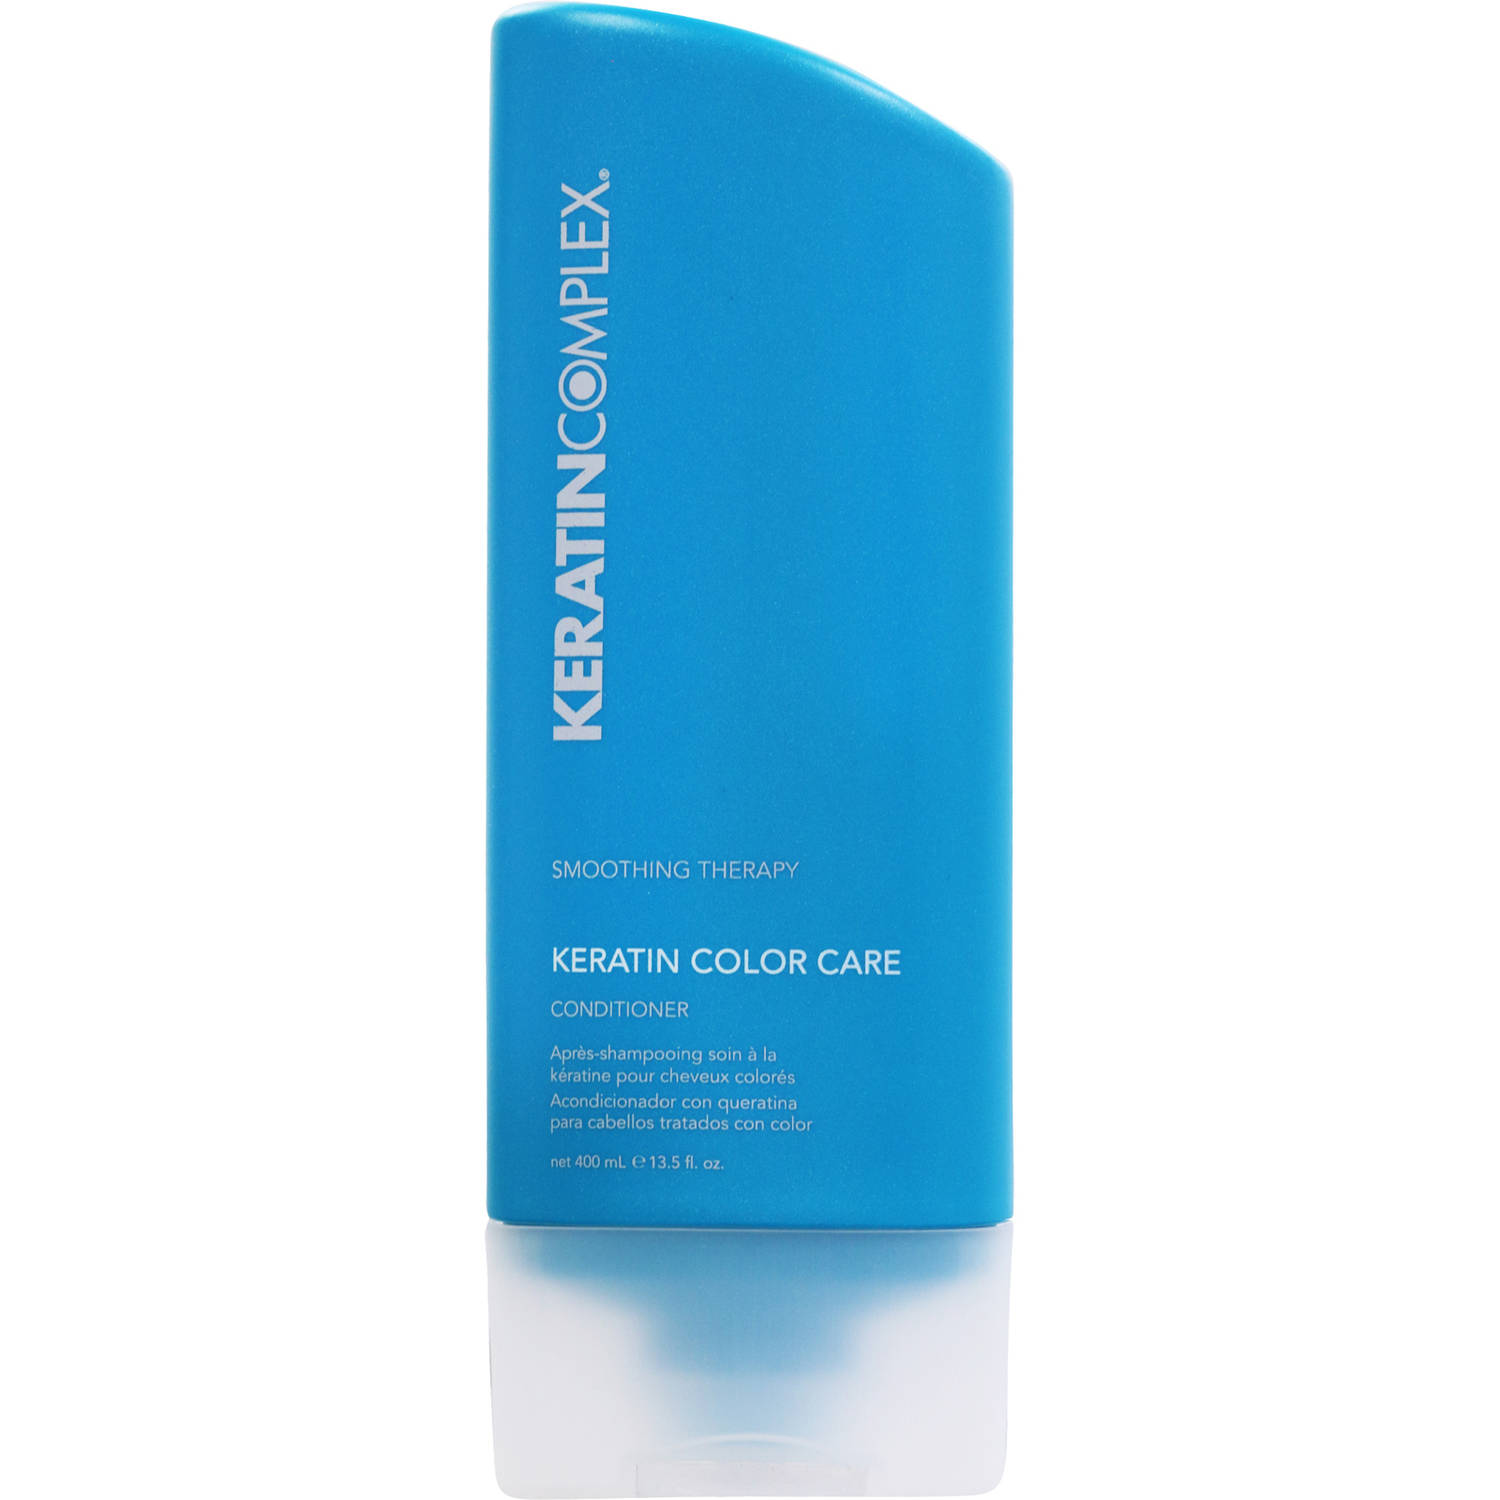 Keratin Complex Keratin Color Care Smoothing Therapy Conditioner - image 1 of 5